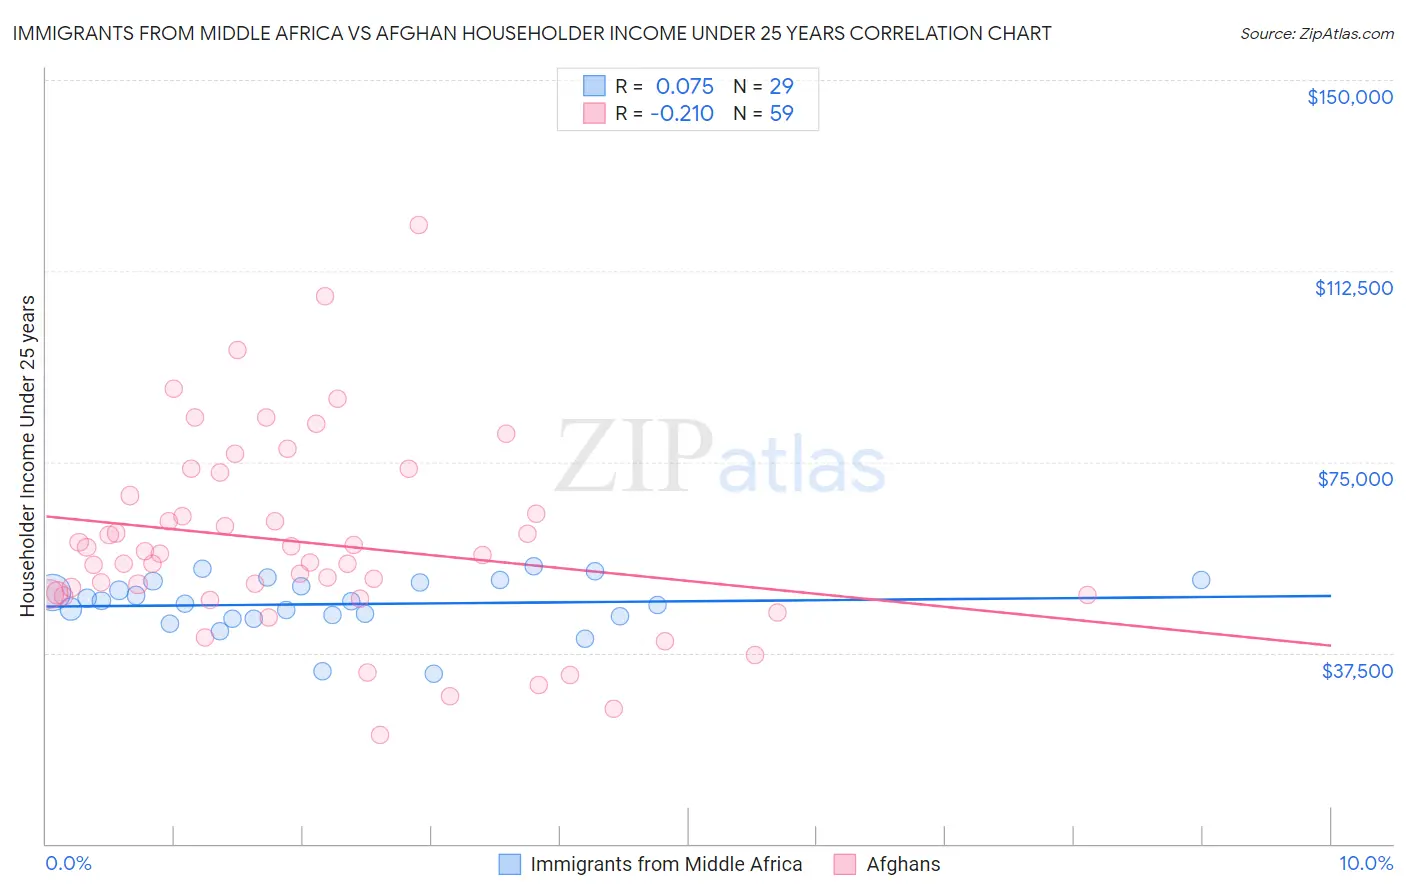 Immigrants from Middle Africa vs Afghan Householder Income Under 25 years